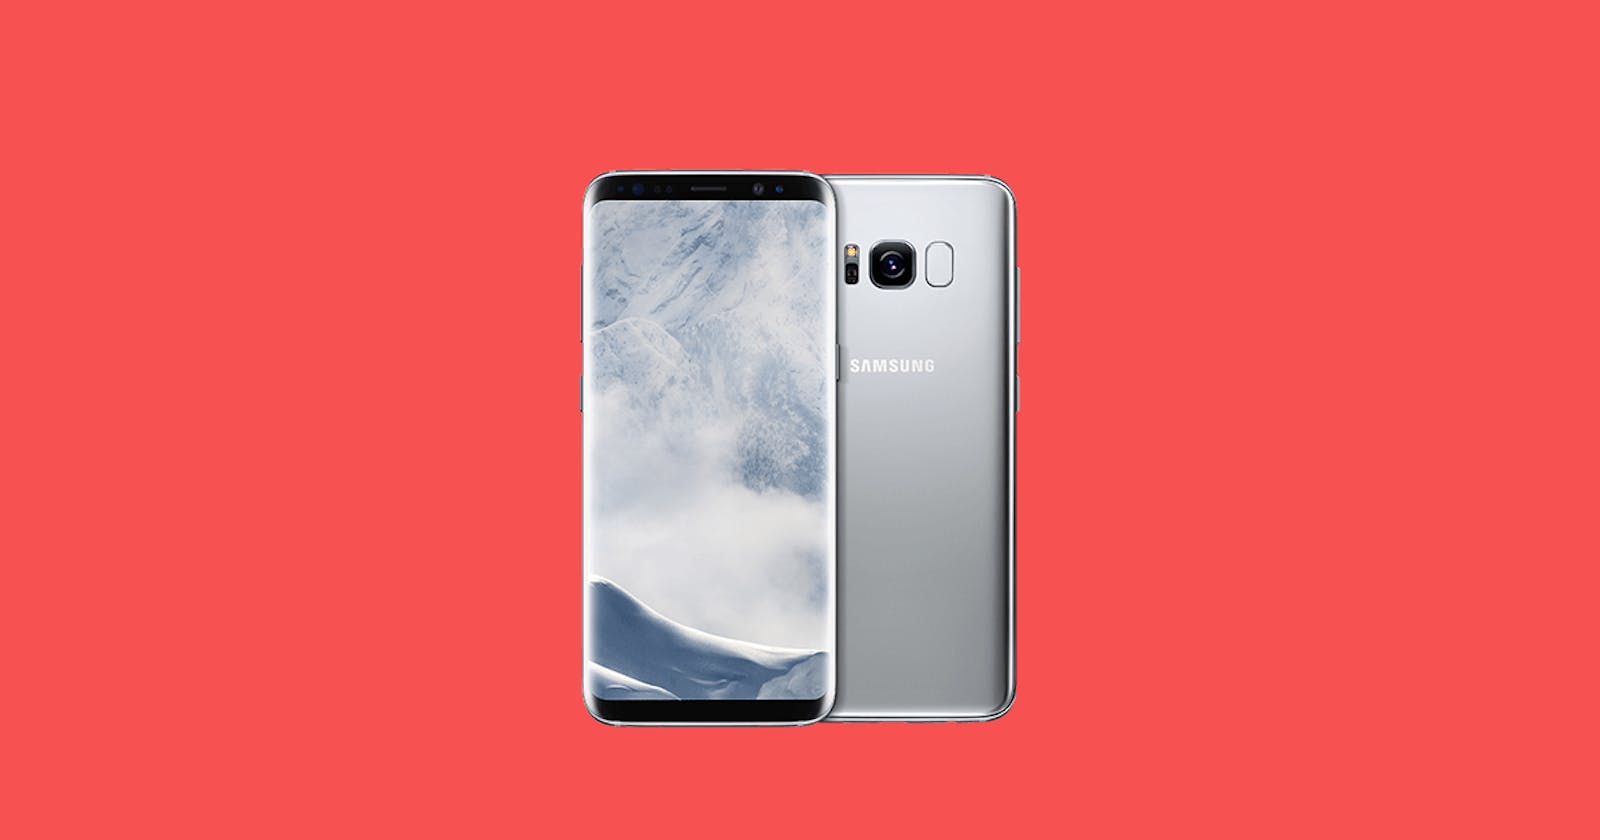 Three Actually-Hidden, Non-Clickbaity Tricks for Your New Galaxy S8 or S8+